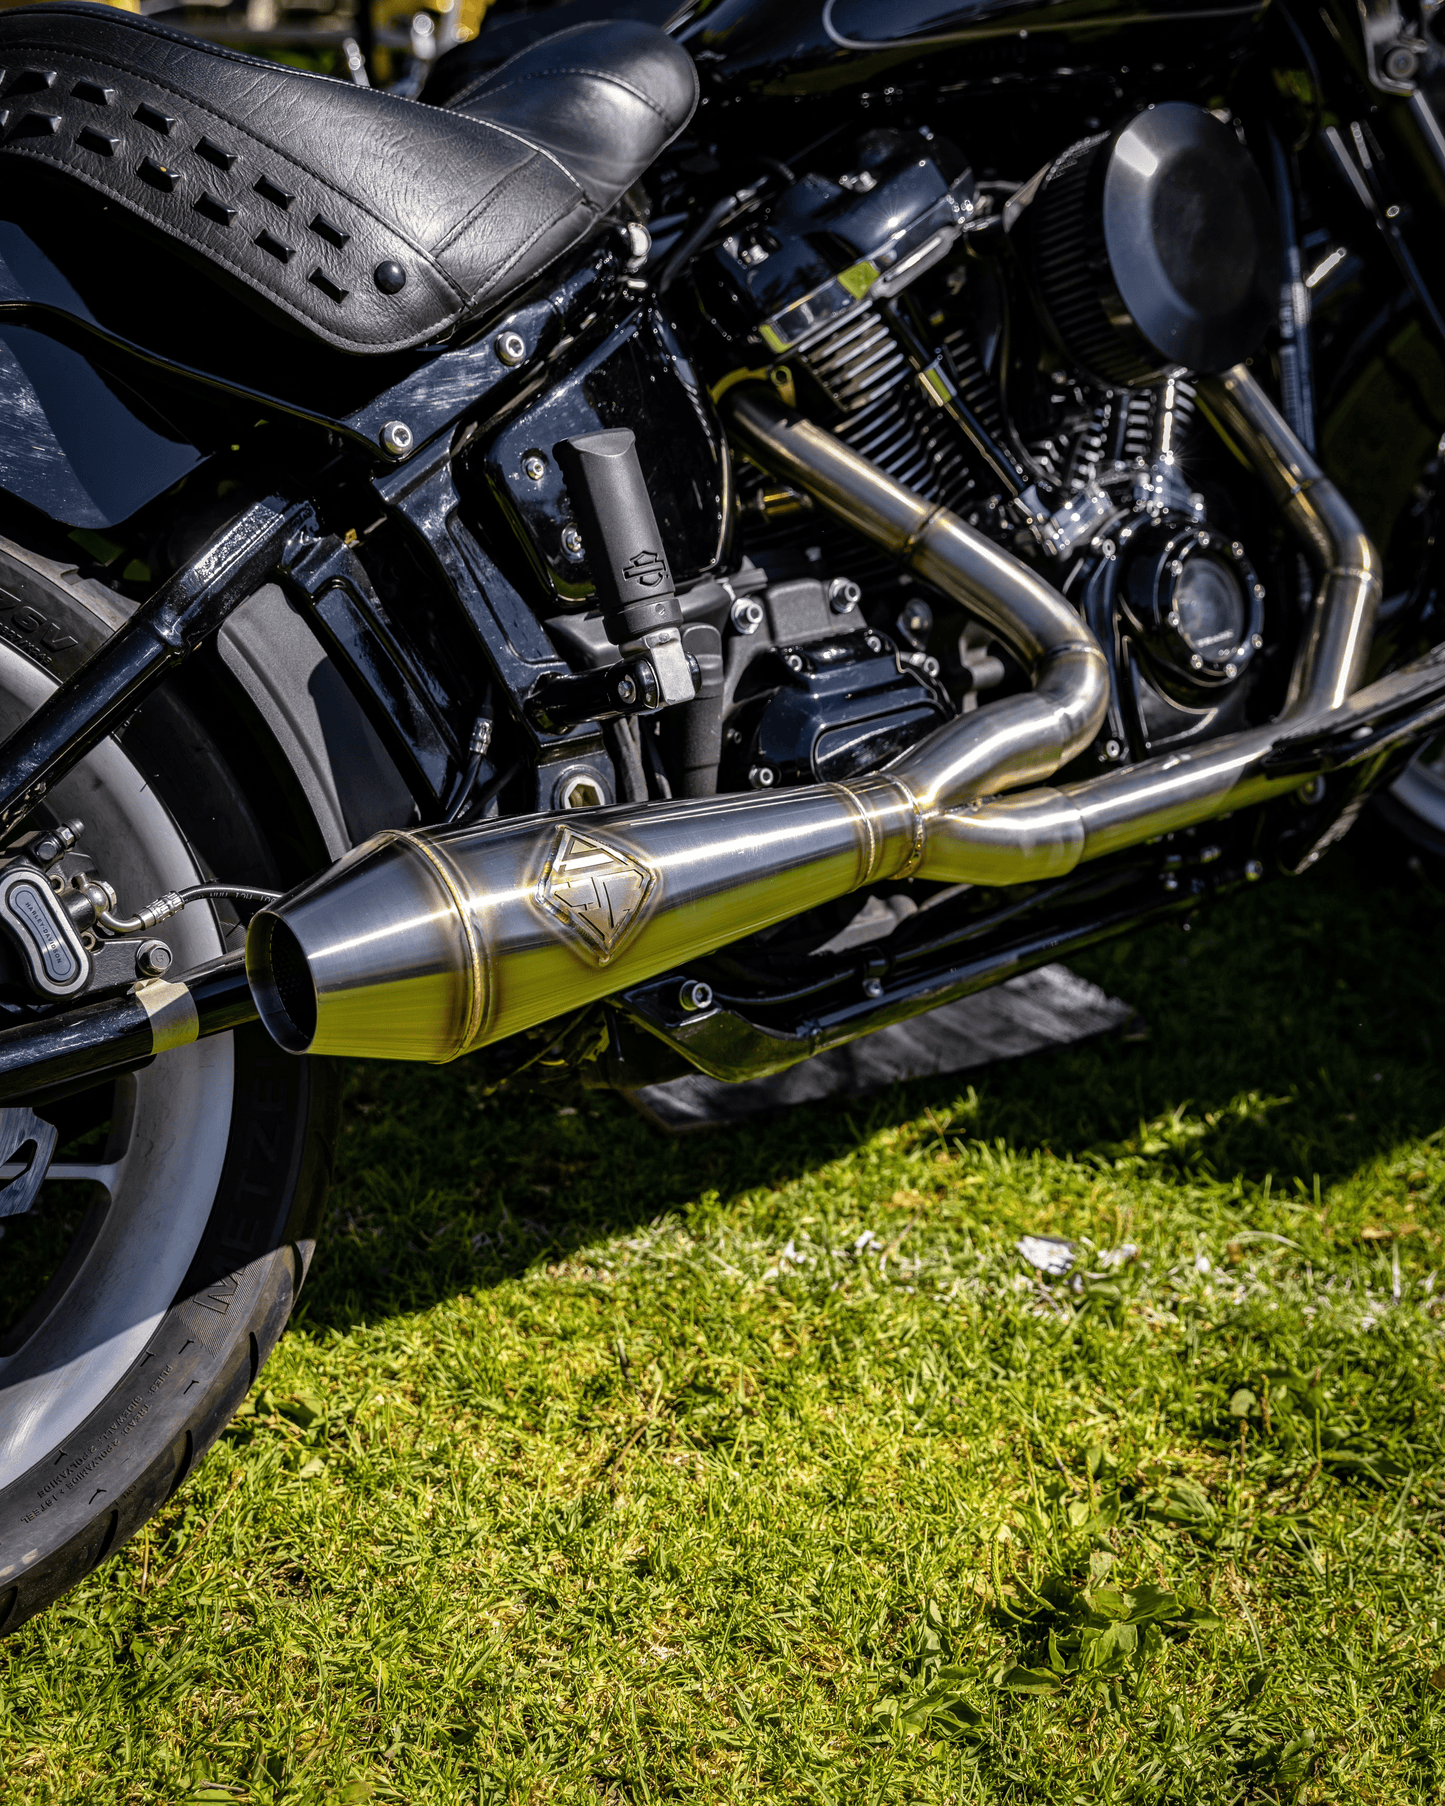 M8 Bagger Harley Davidson Motorcycle with Big Bore Exhaust